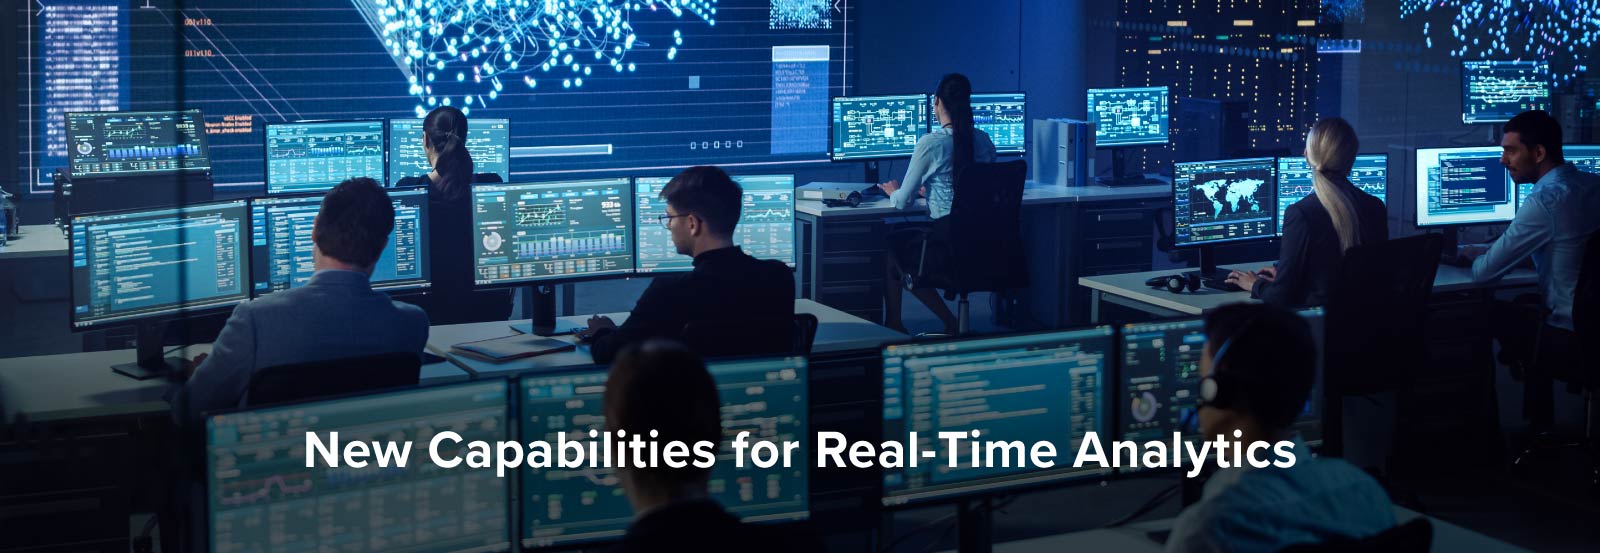 New Capabilities for Real-Time Analytics